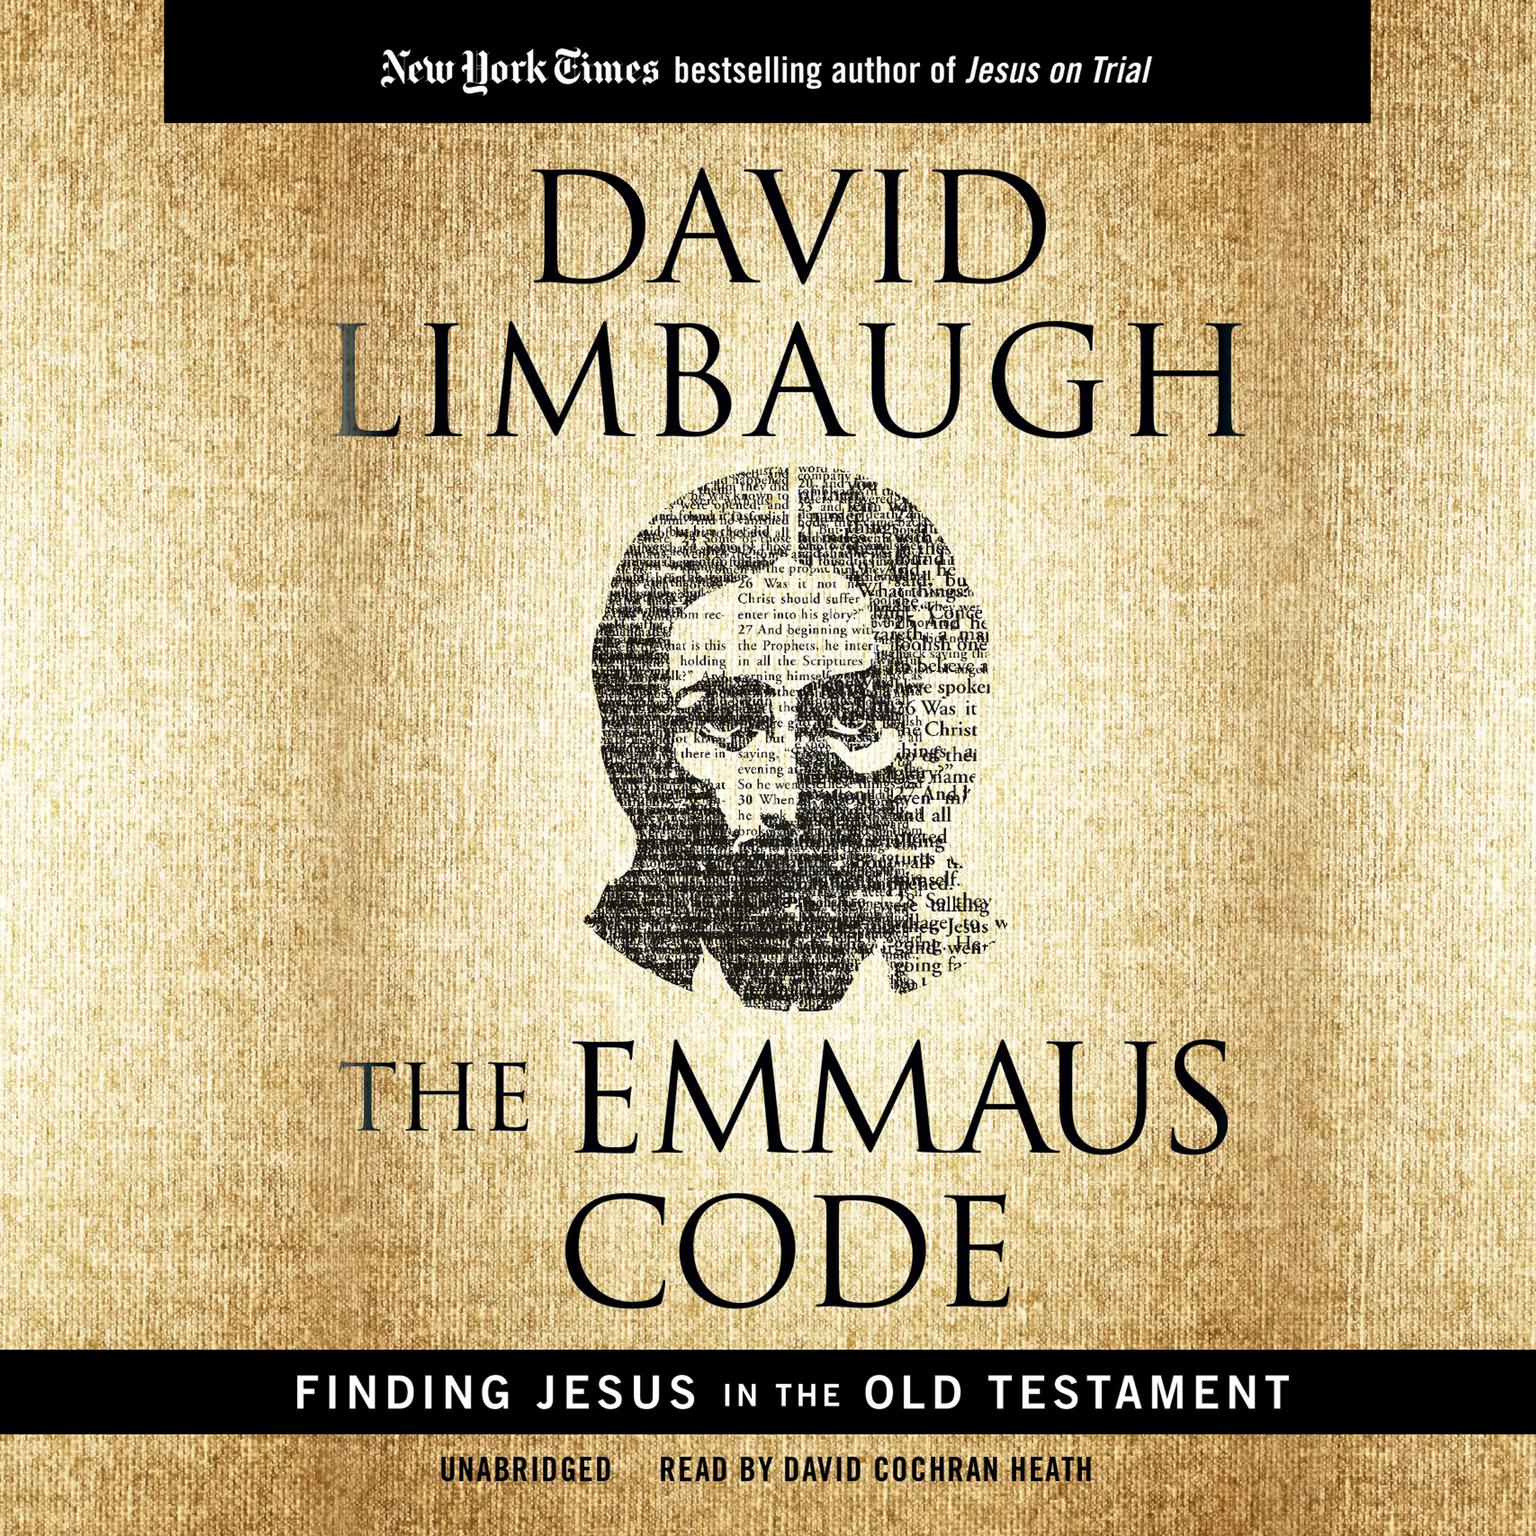 The Emmaus Code: Finding Jesus in the Old Testament Audiobook, by David Limbaugh